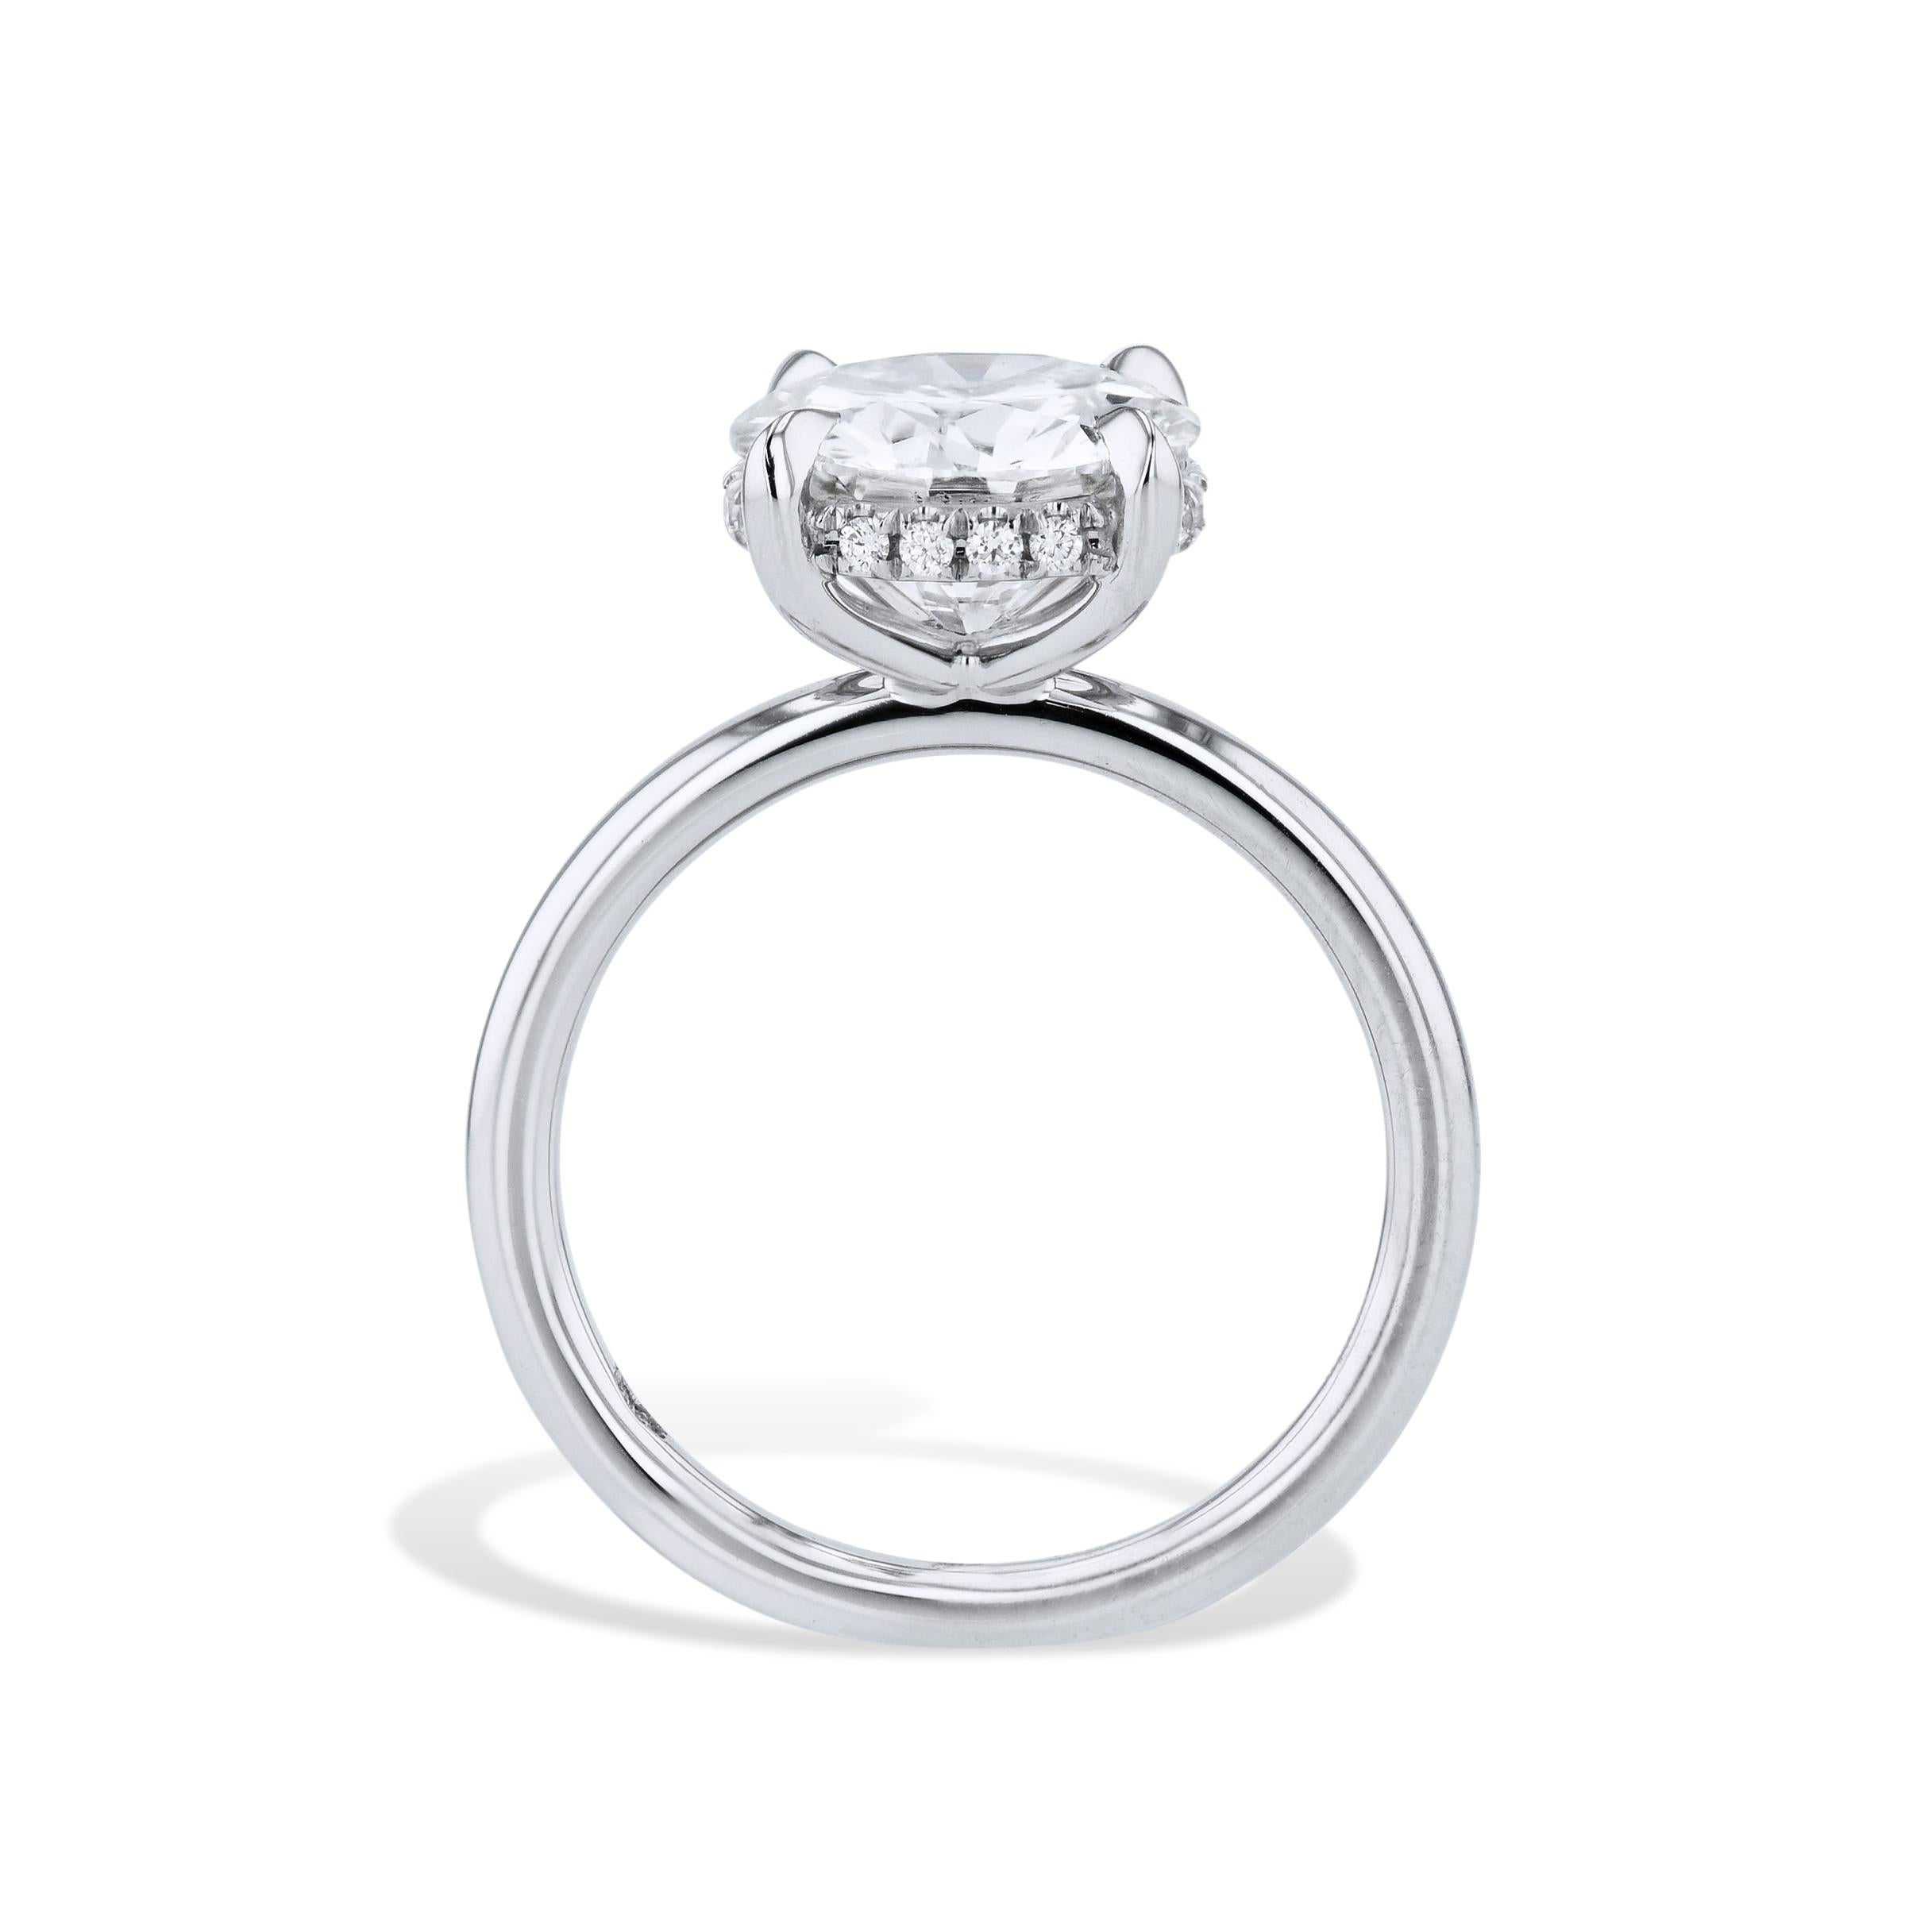 A dazzling 3.11 carat Round Brilliant Cut diamond, GIA # 5212971001, awaits at the center of this glamorous engagement ring. With sixteen handcrafted pave diamonds around the basket in G in color, VS1 in clarity, this Platinum ring is a must-have